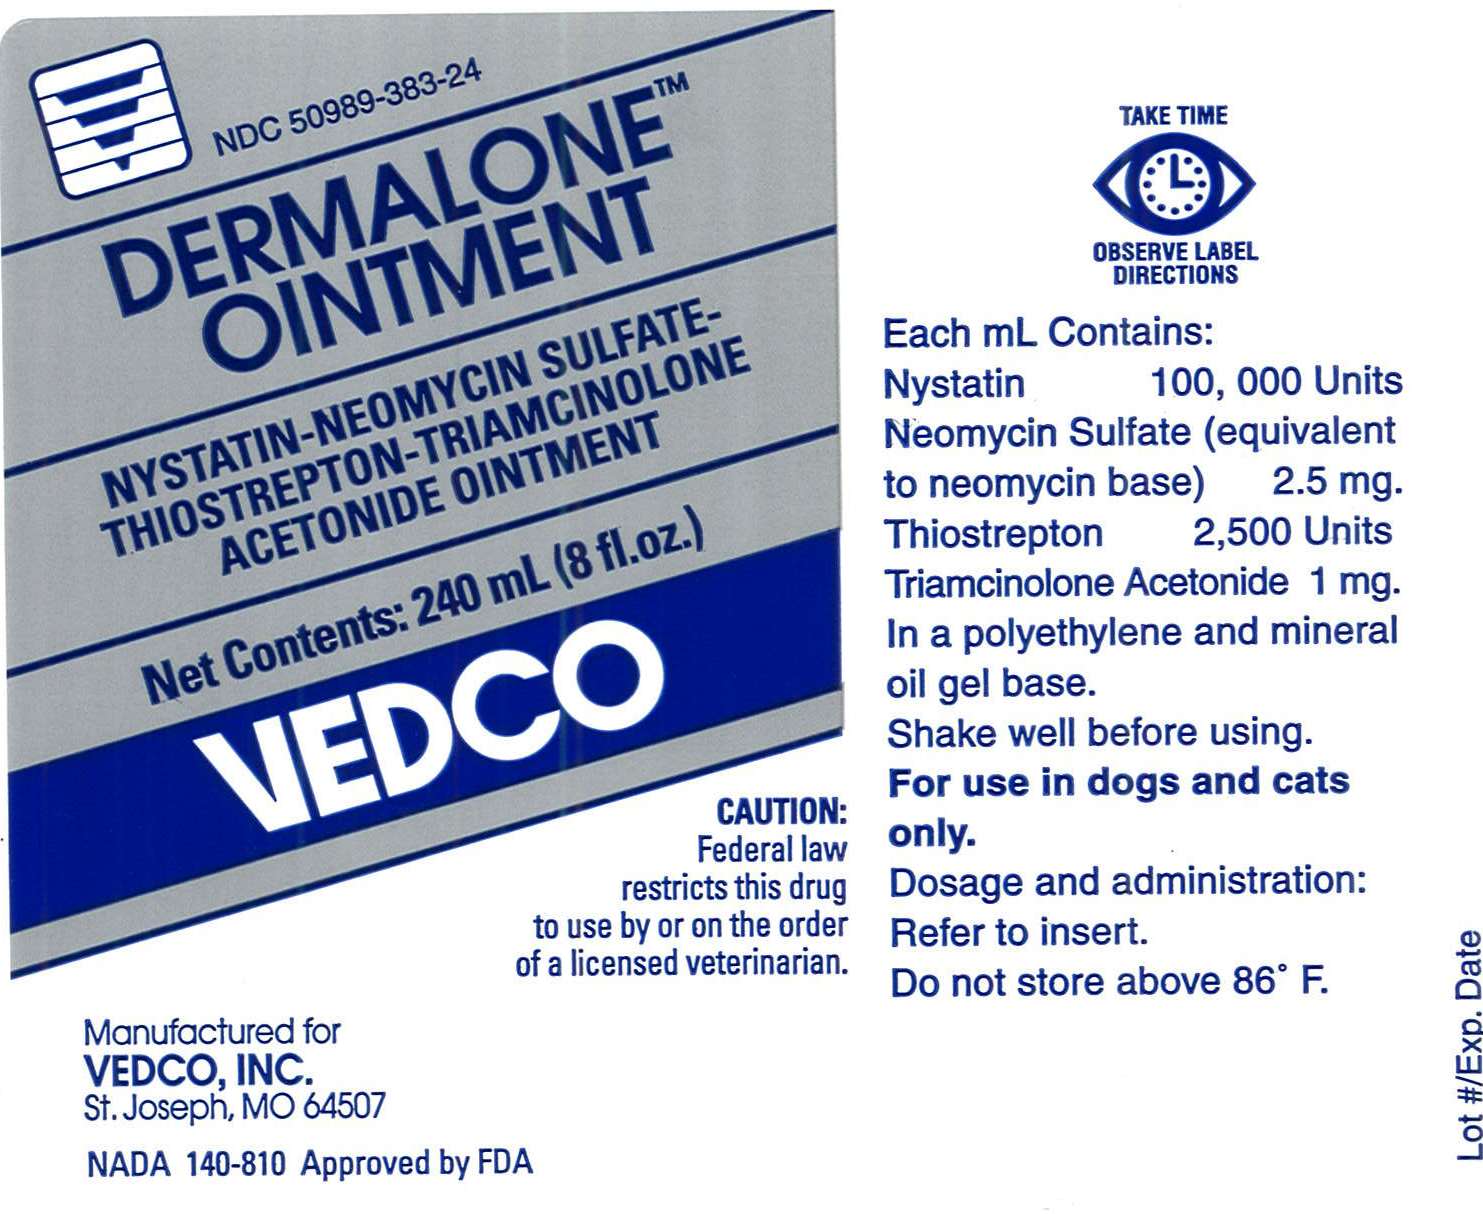 Vedco Dermalone Ointment 240 mL